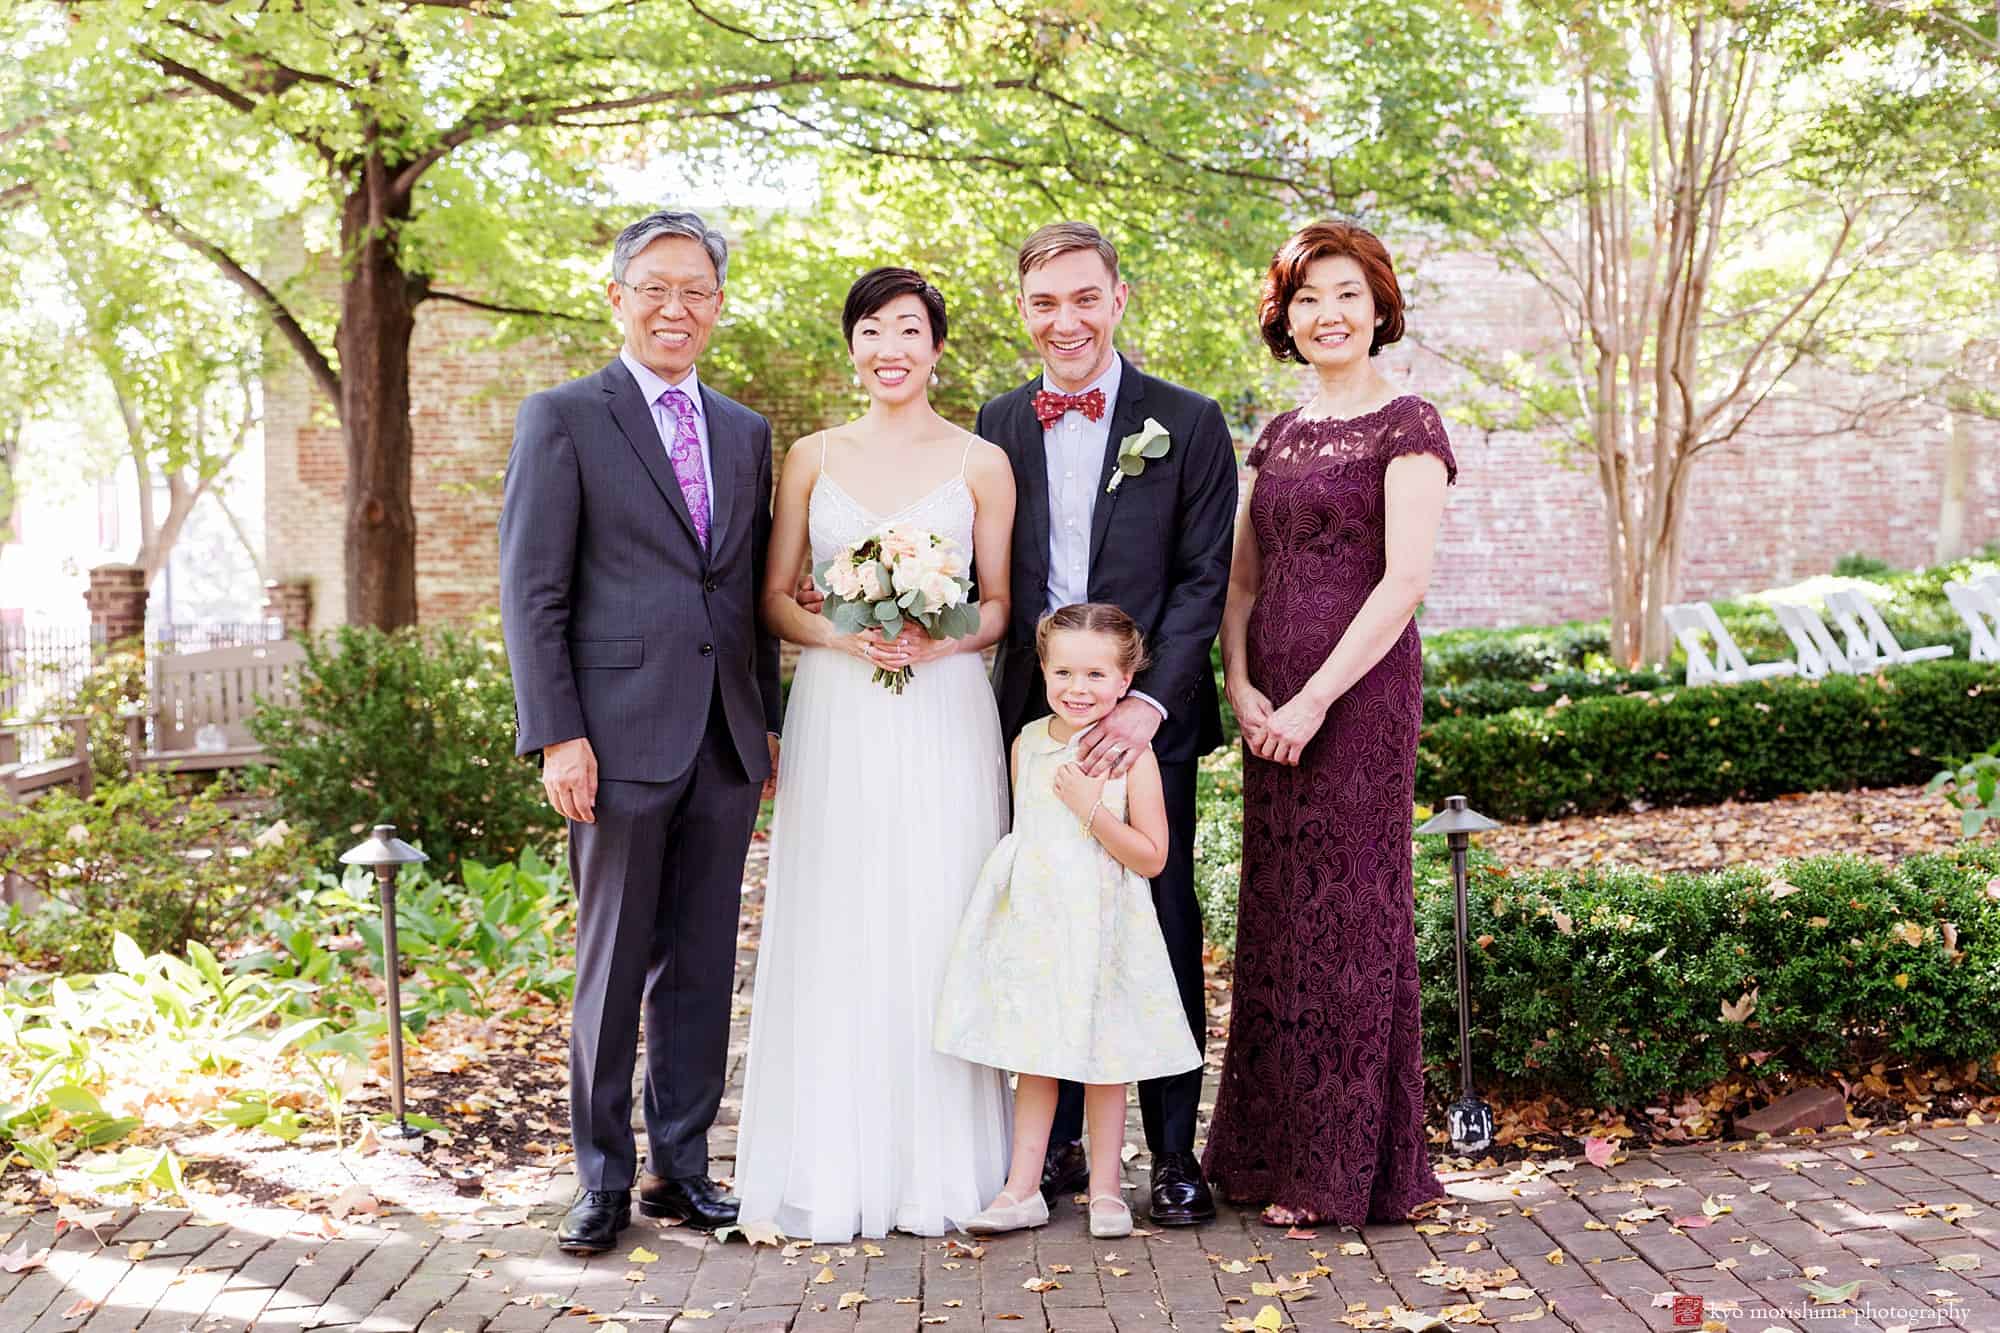 How To Make Your Wedding Shot List The Alexandrian Old Town Alexandria, Autograph Collection Carlyle House Historic Park Virtue Feed & Grain va wedding wedding portrait family flower girl